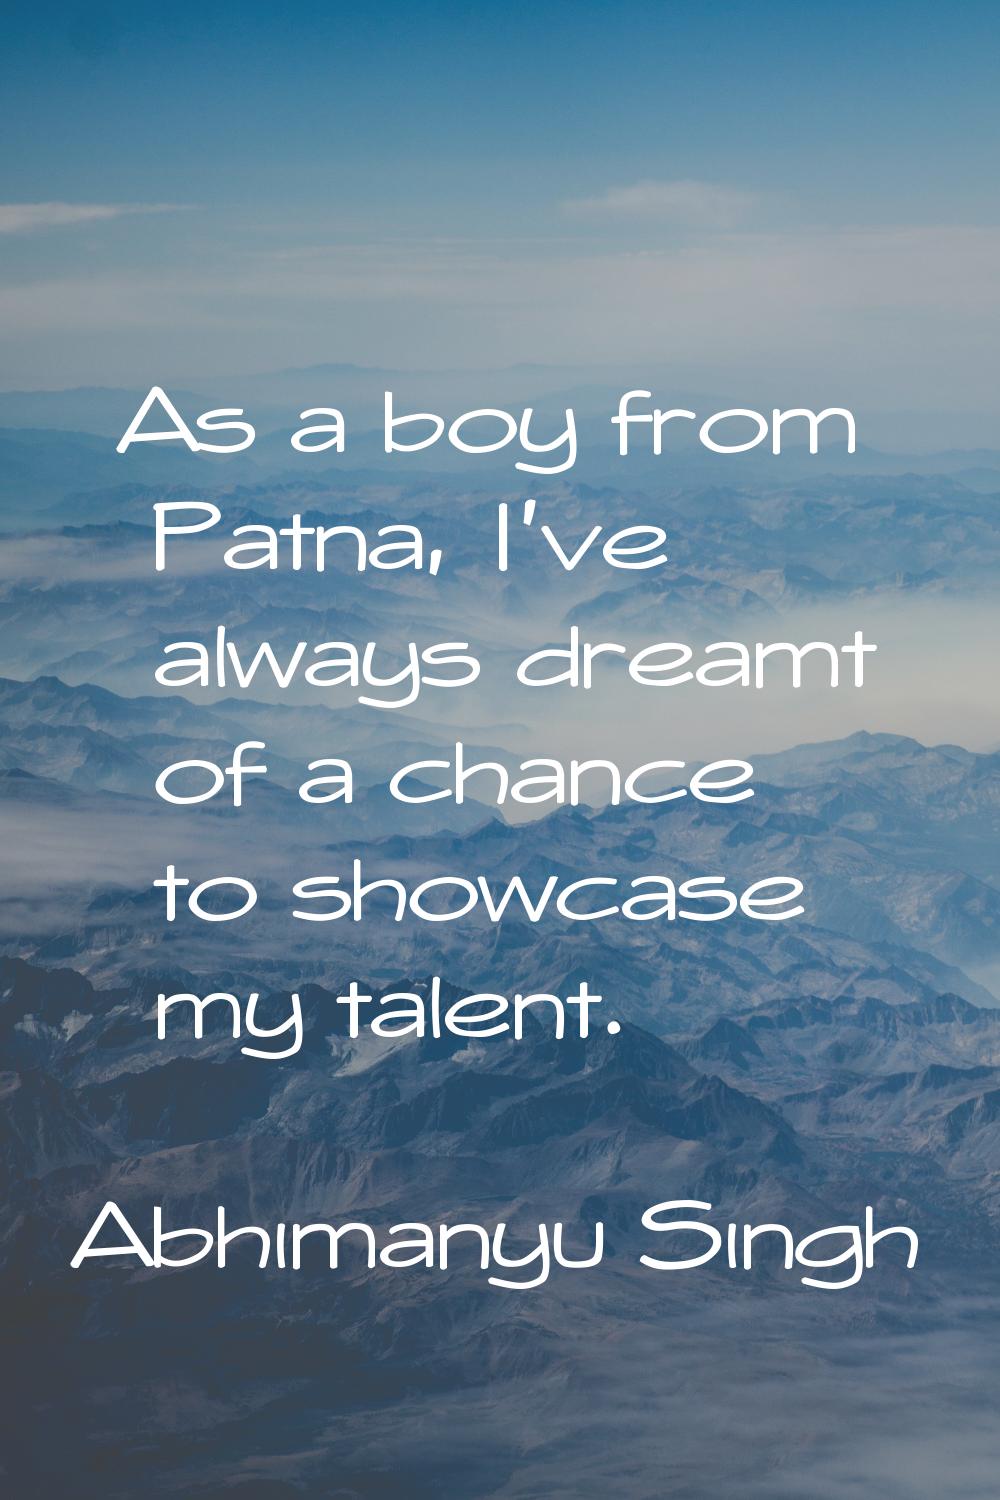 As a boy from Patna, I've always dreamt of a chance to showcase my talent.